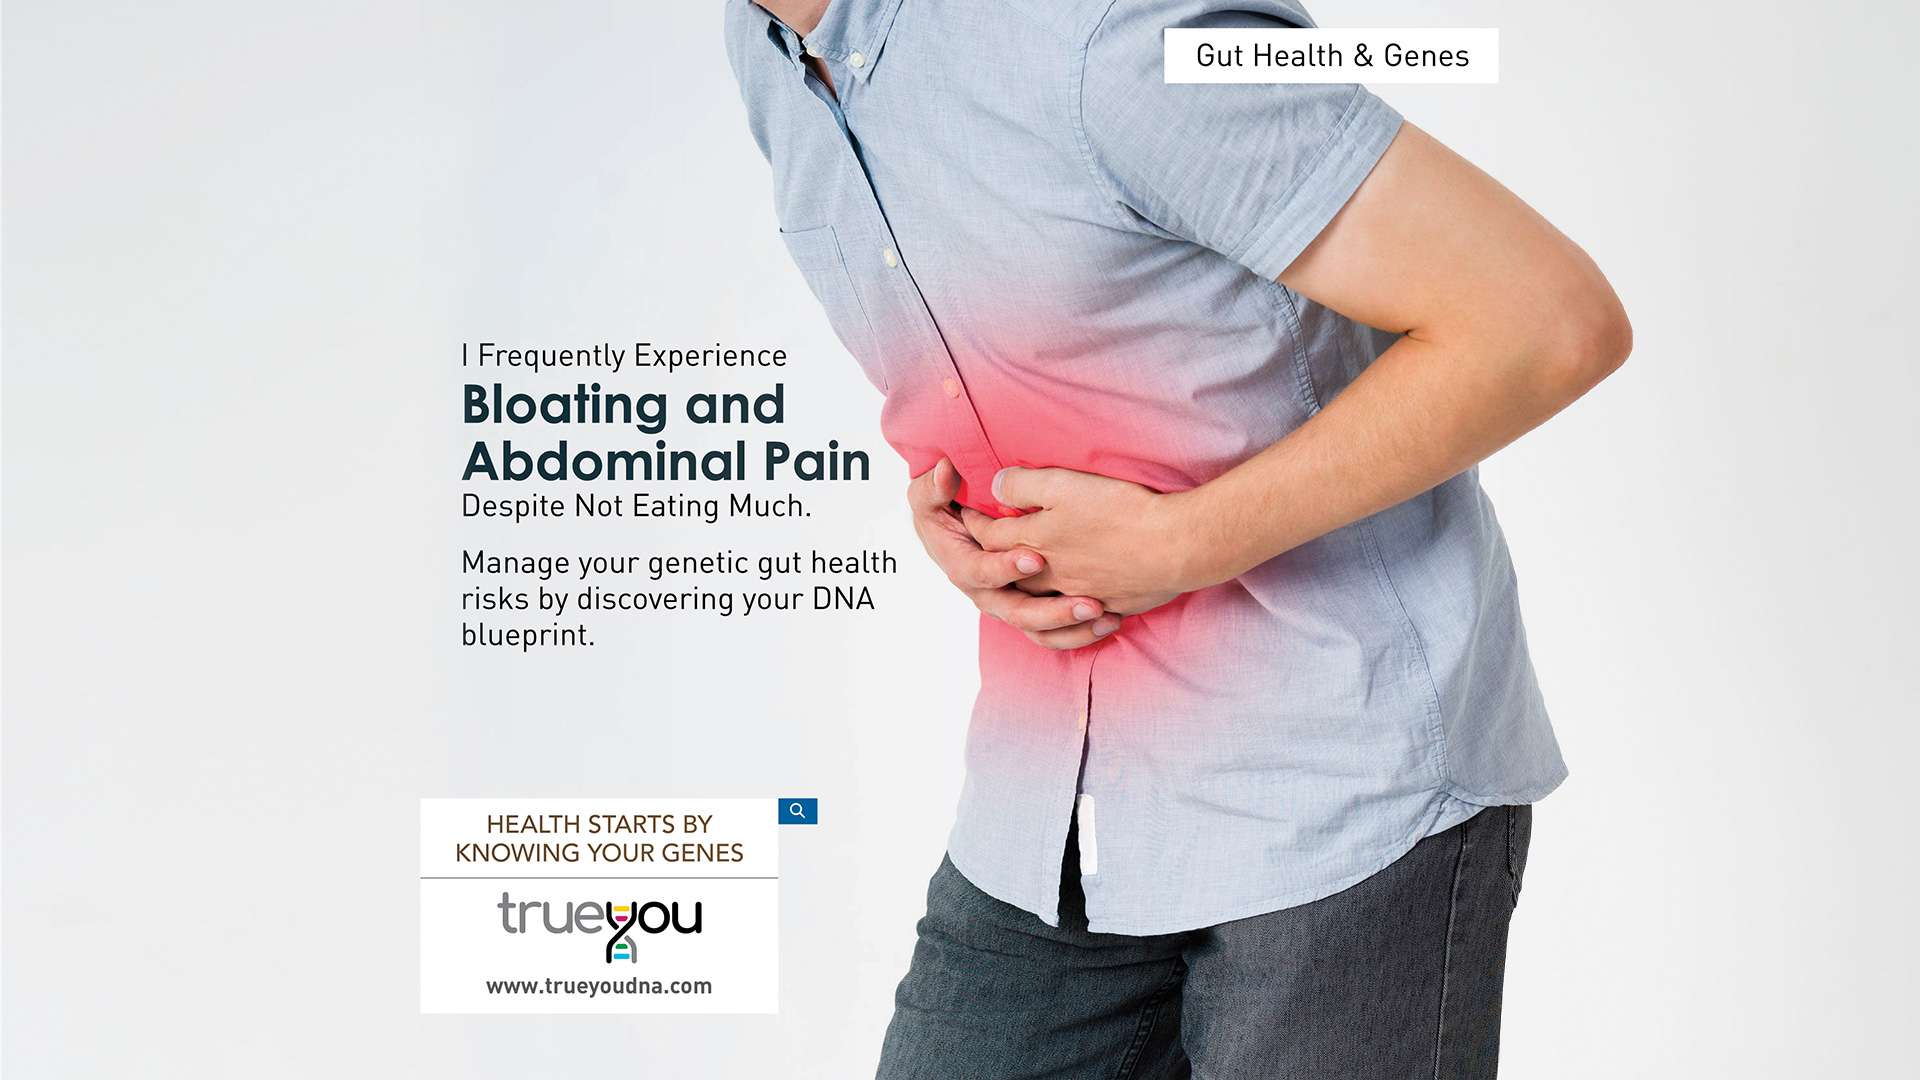 I frequently experience bloating and abdominal pain...